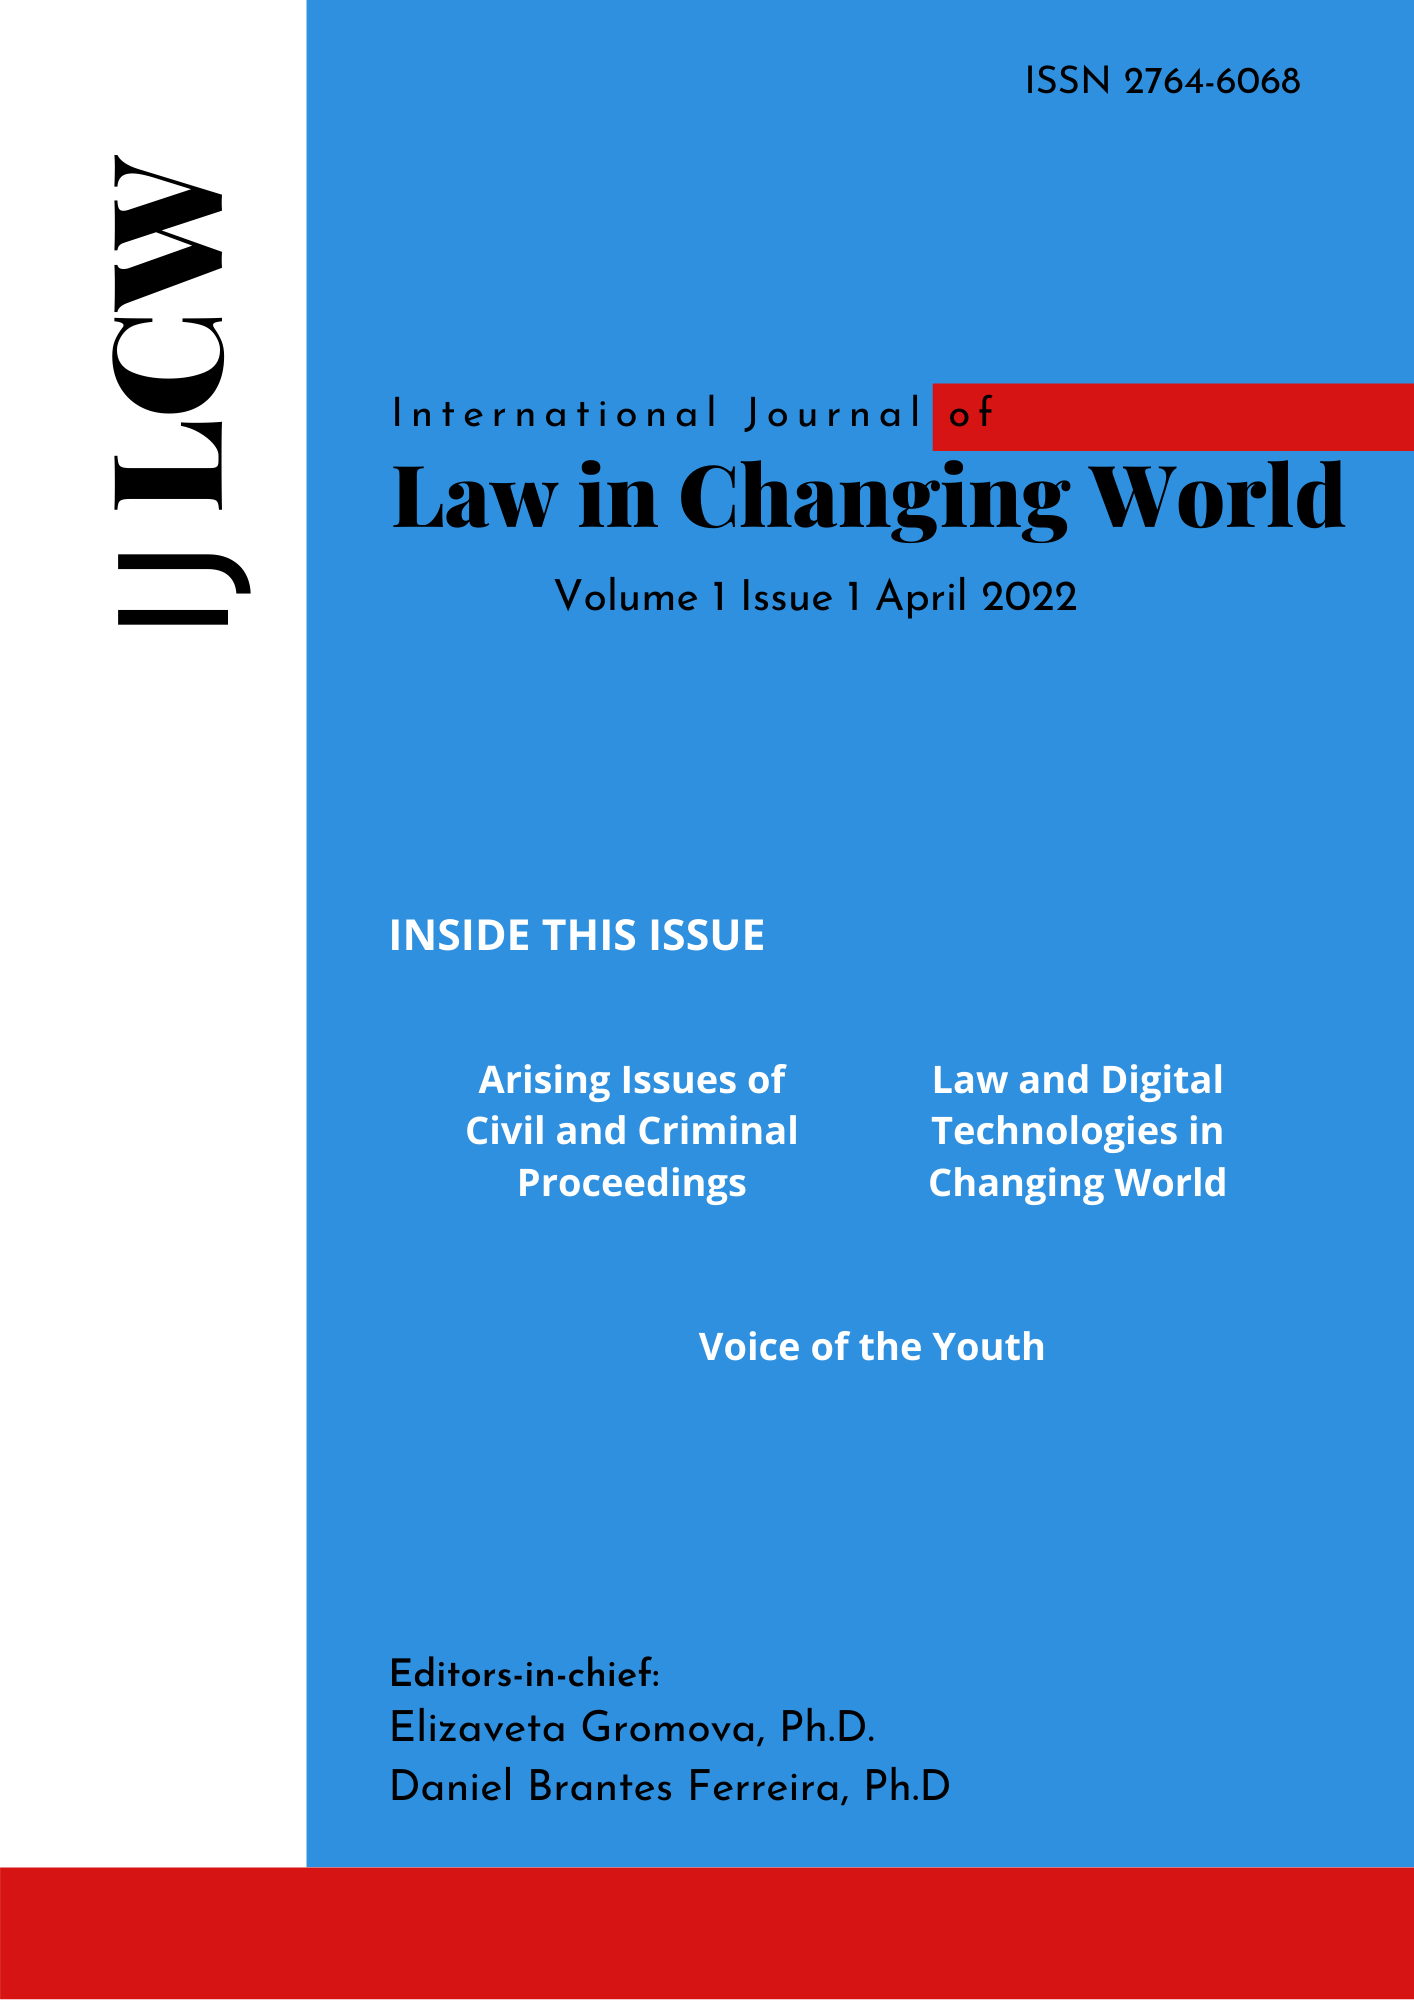 blue Regular Issue cover for the International Journal of Law in Changing World ISSN 2764-6068